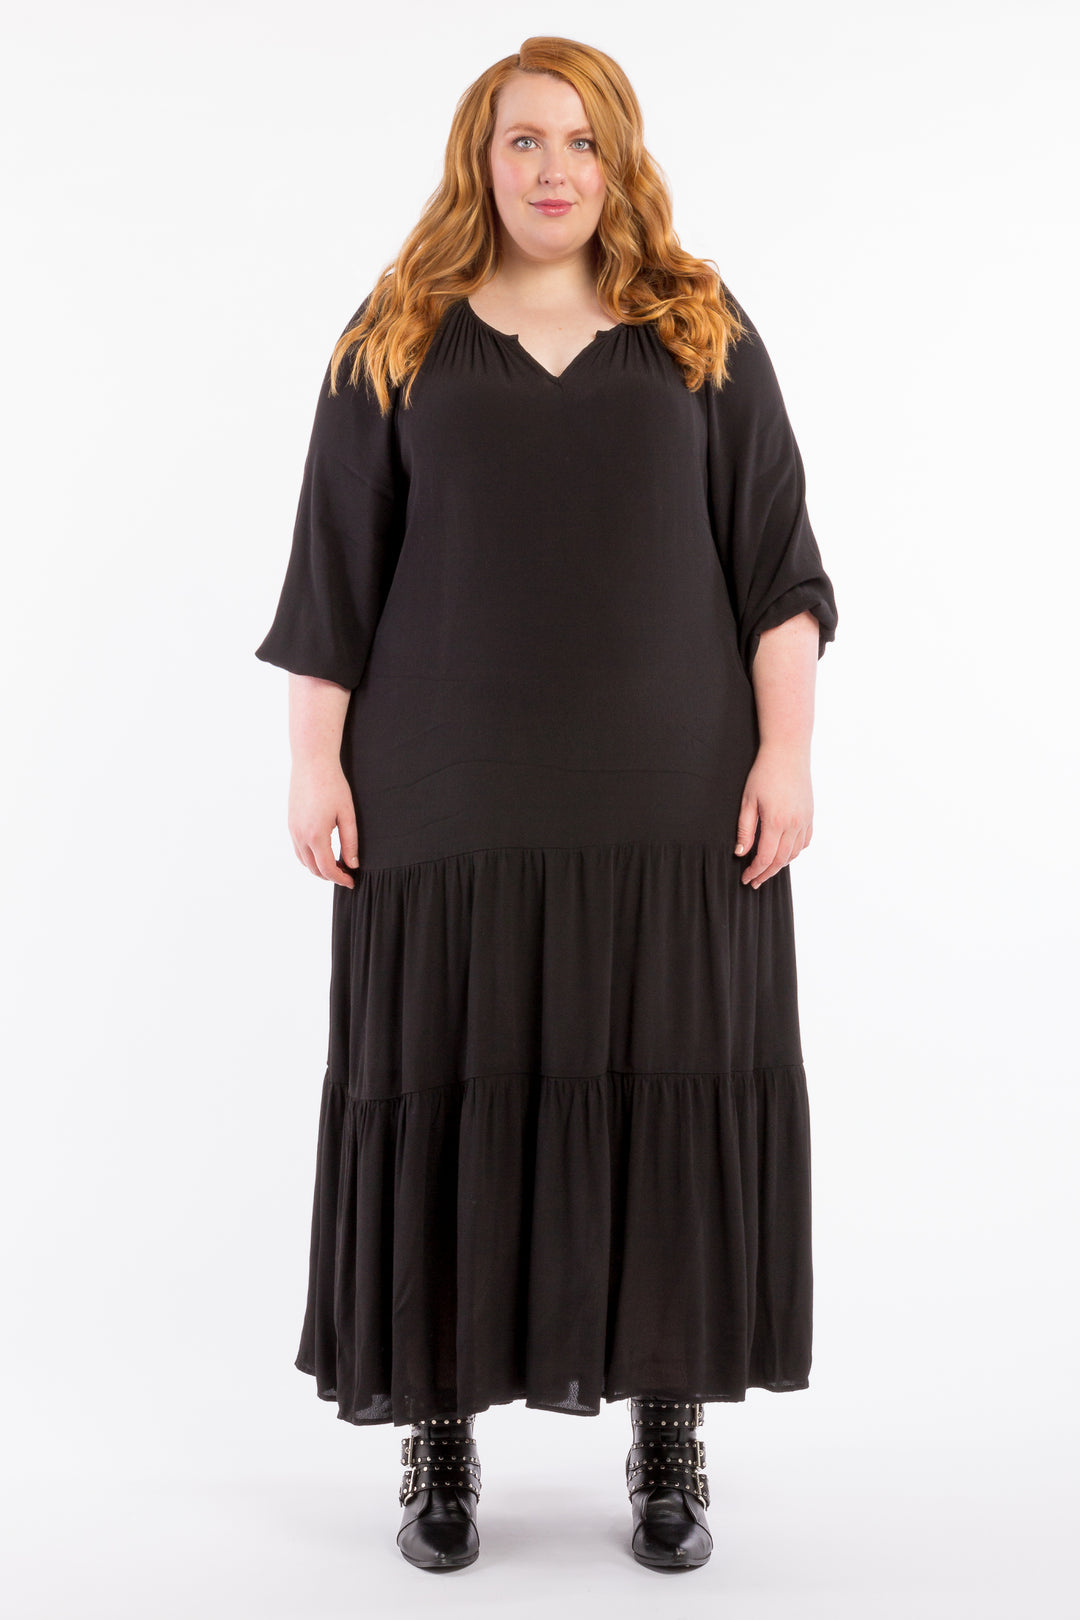 Mystery To Me Maxi - Black -  STOCK AVAILABLE - S (14/16)